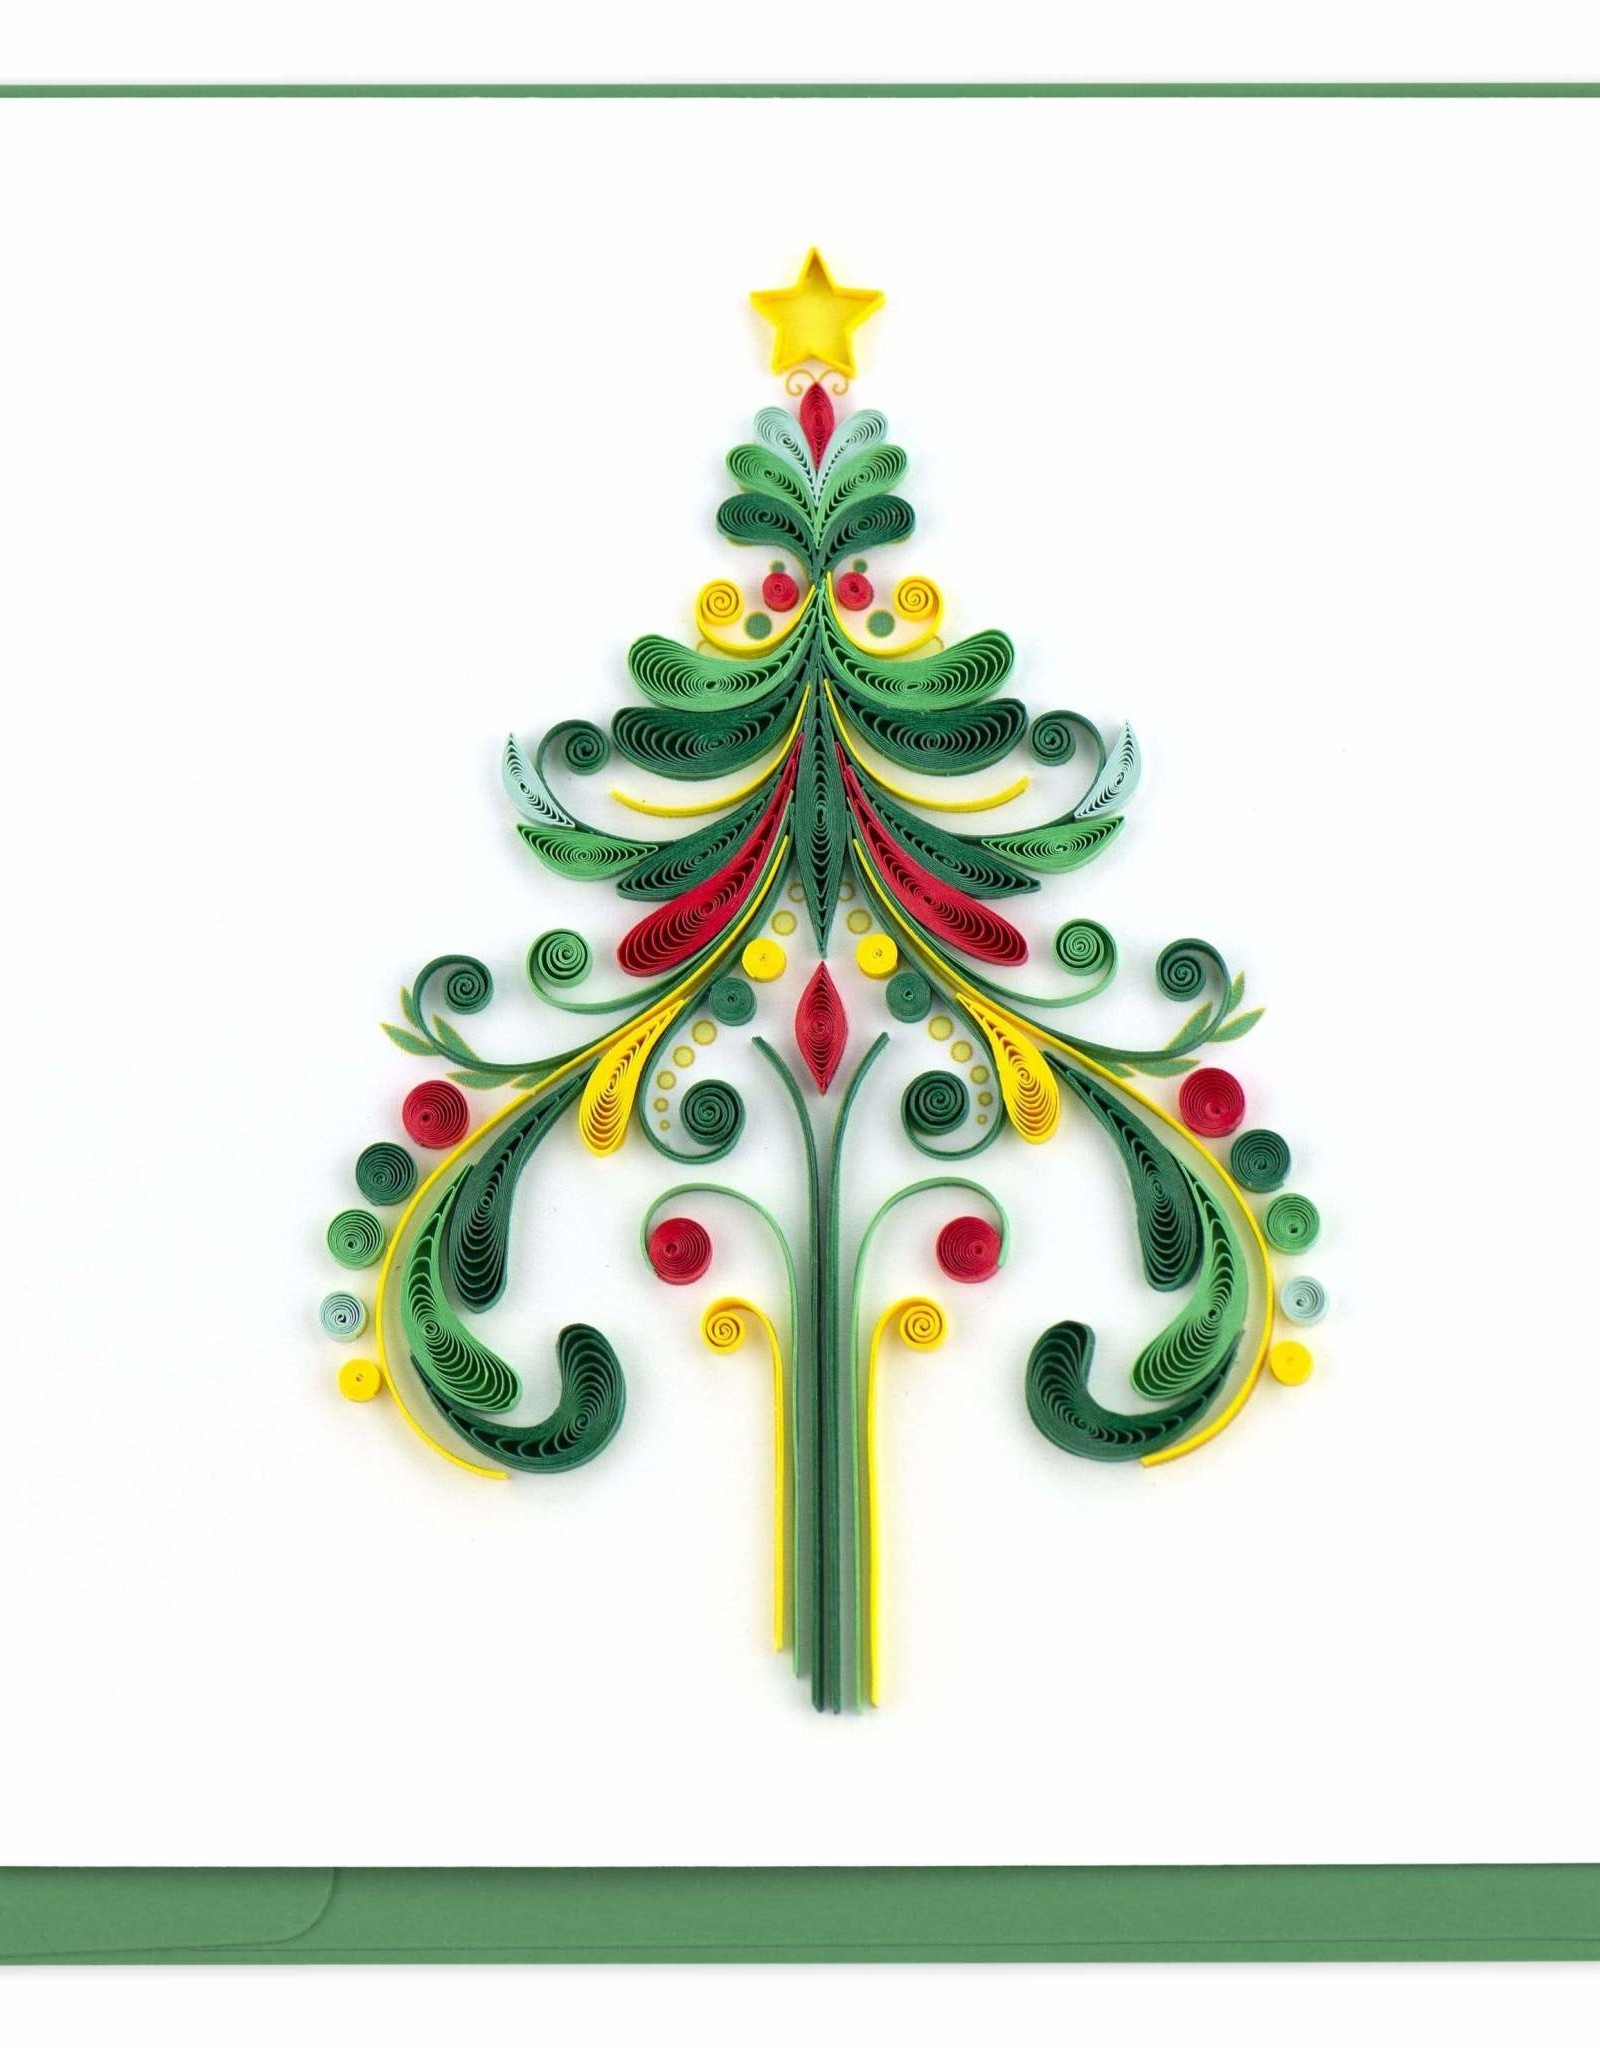 Quilling Card Quilled Ornate Christmas Tree Greeting Card